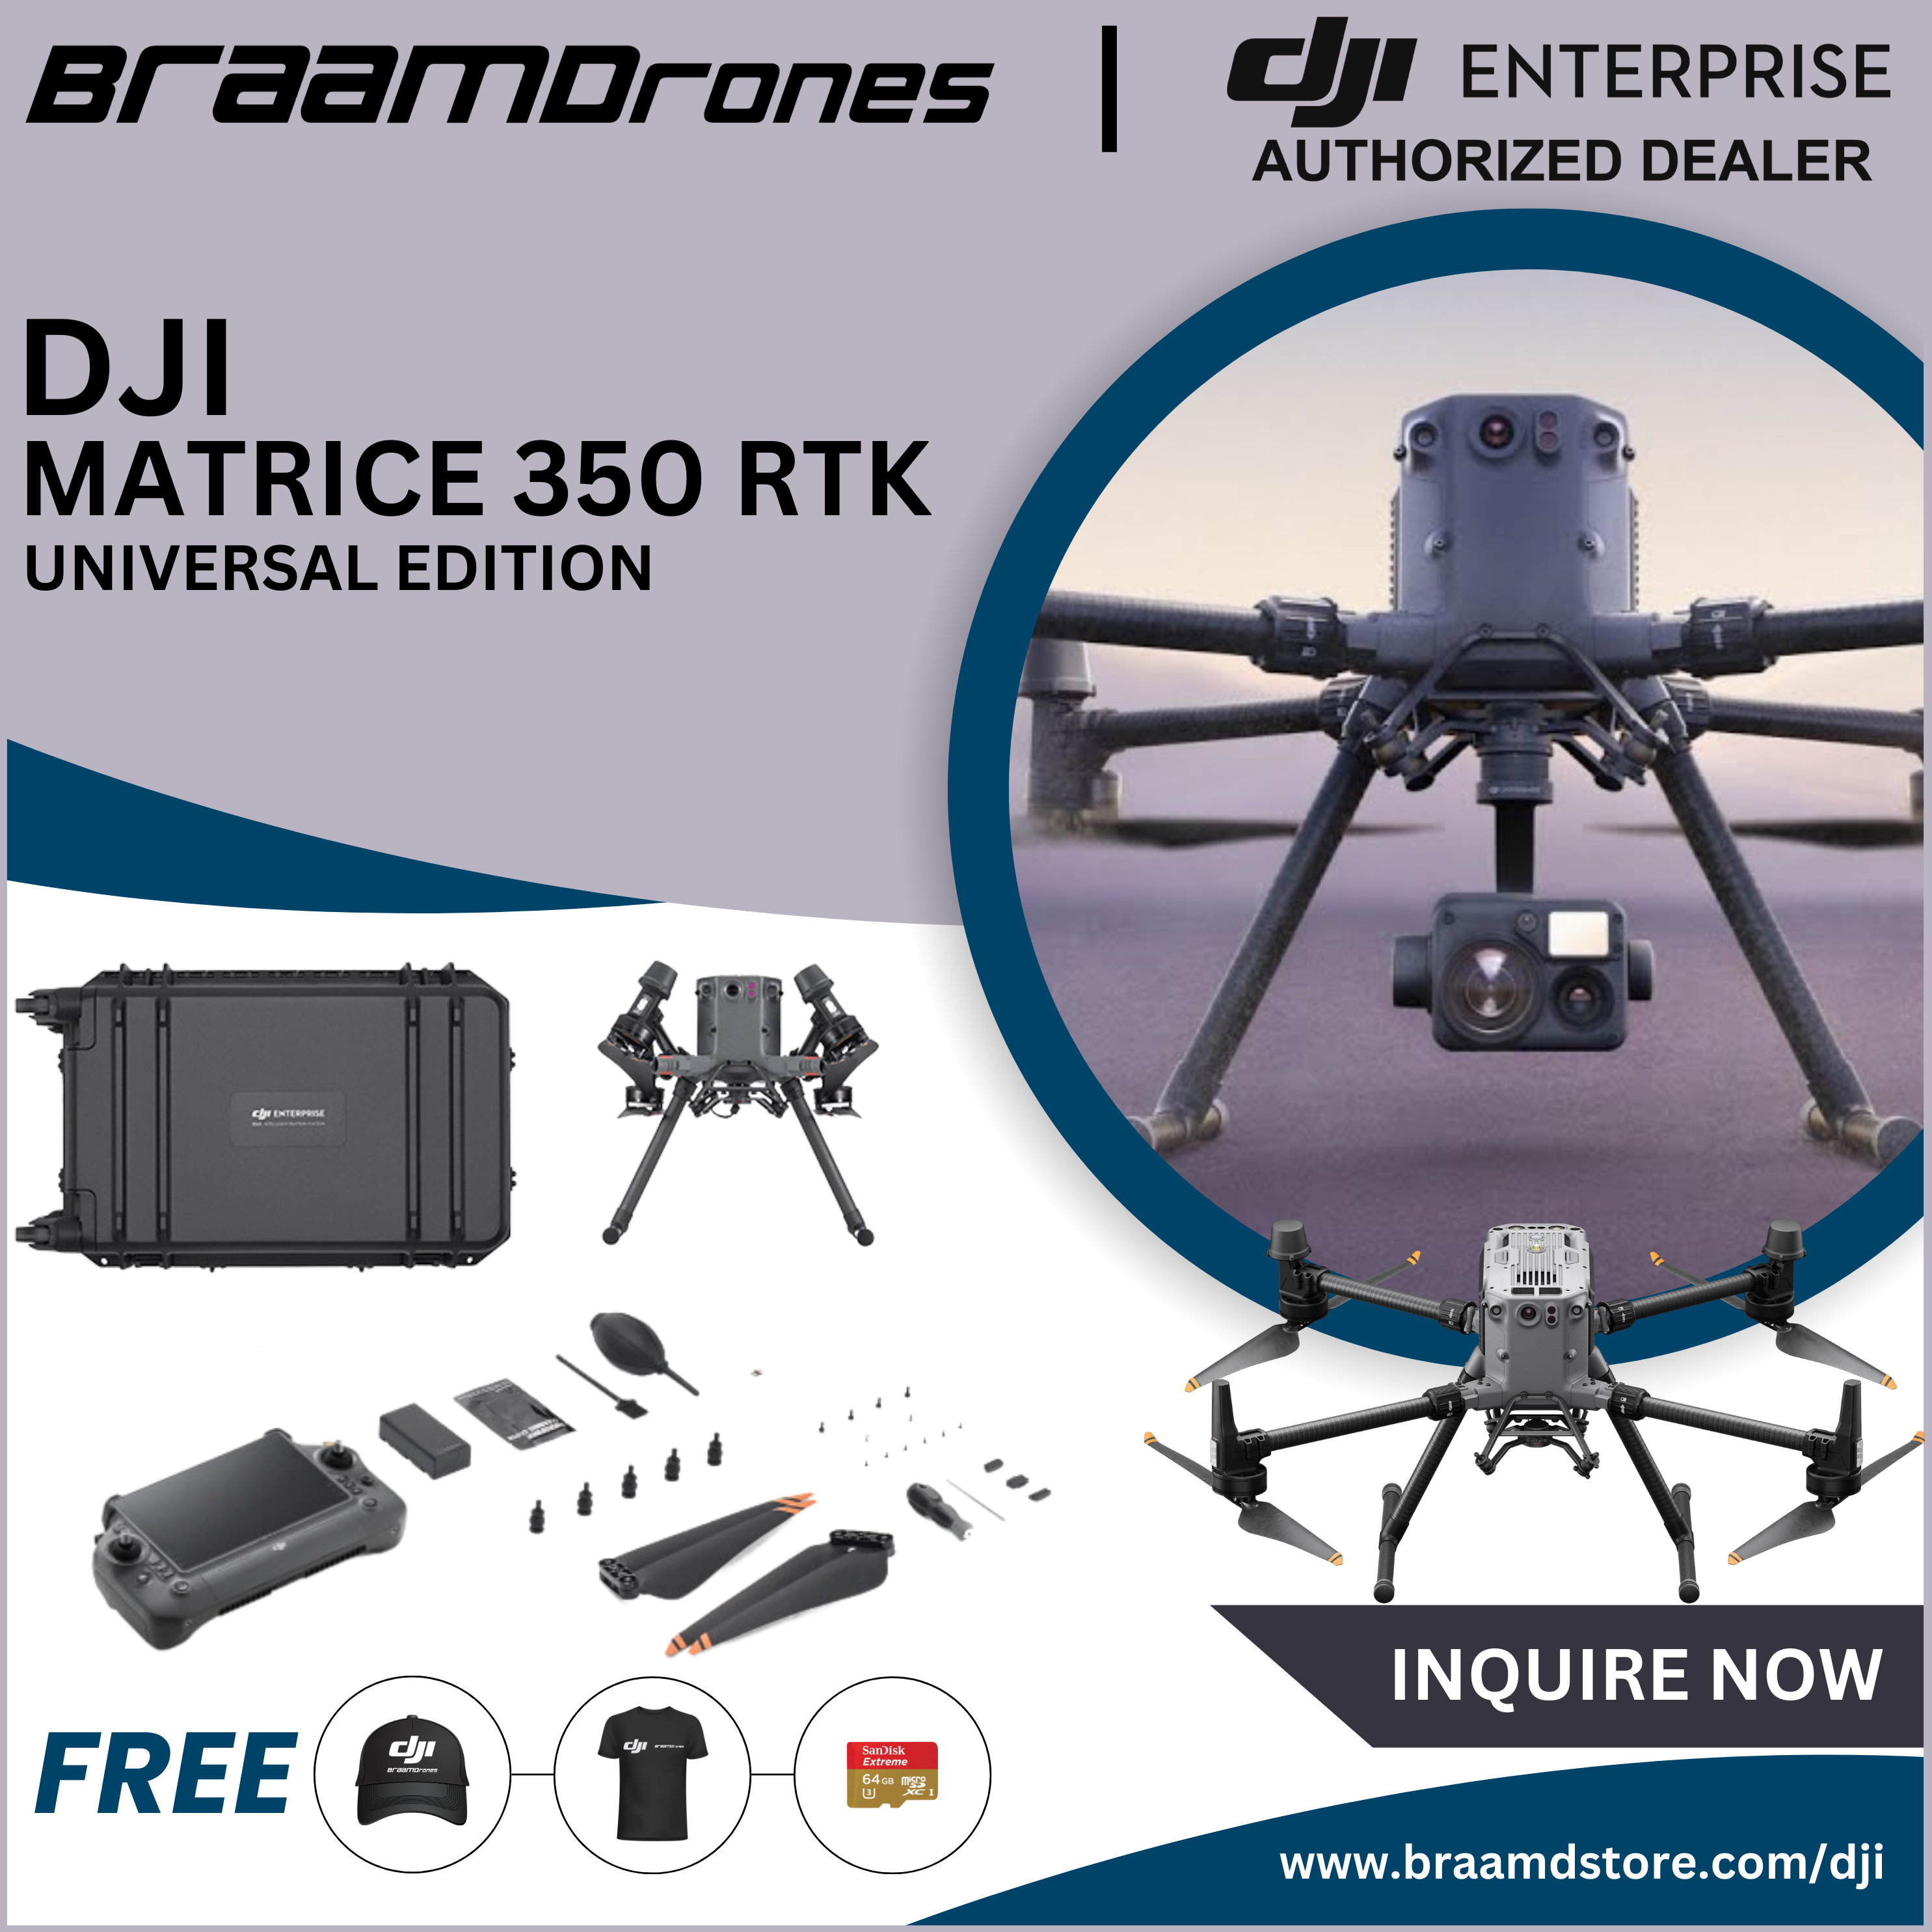 DJI Matrice 350 RTK Flagship Drone with multiple payload options